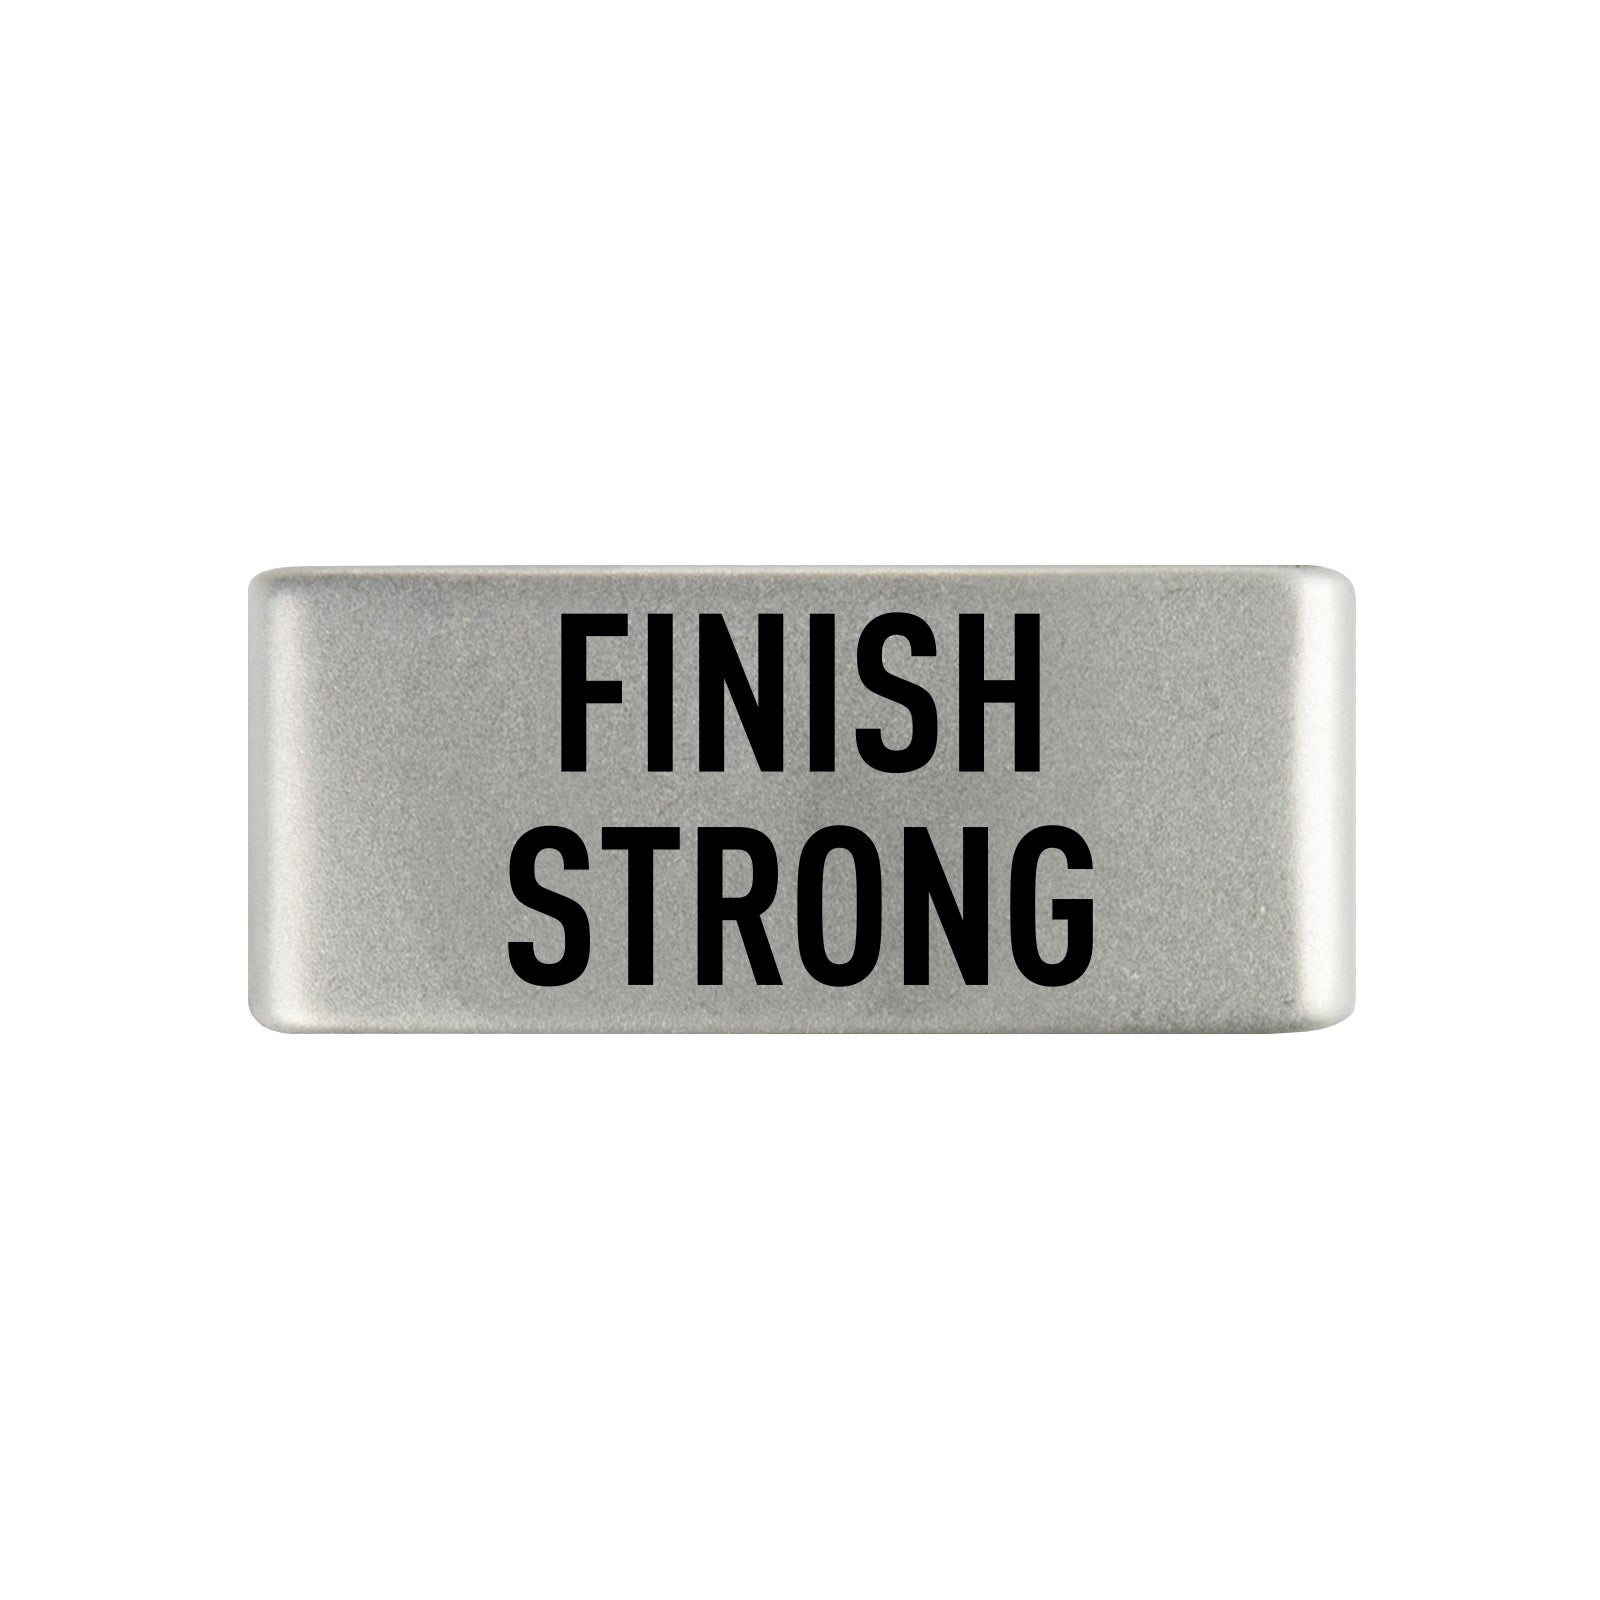 Finish Strong Badge Badge 13mm - ROAD iD